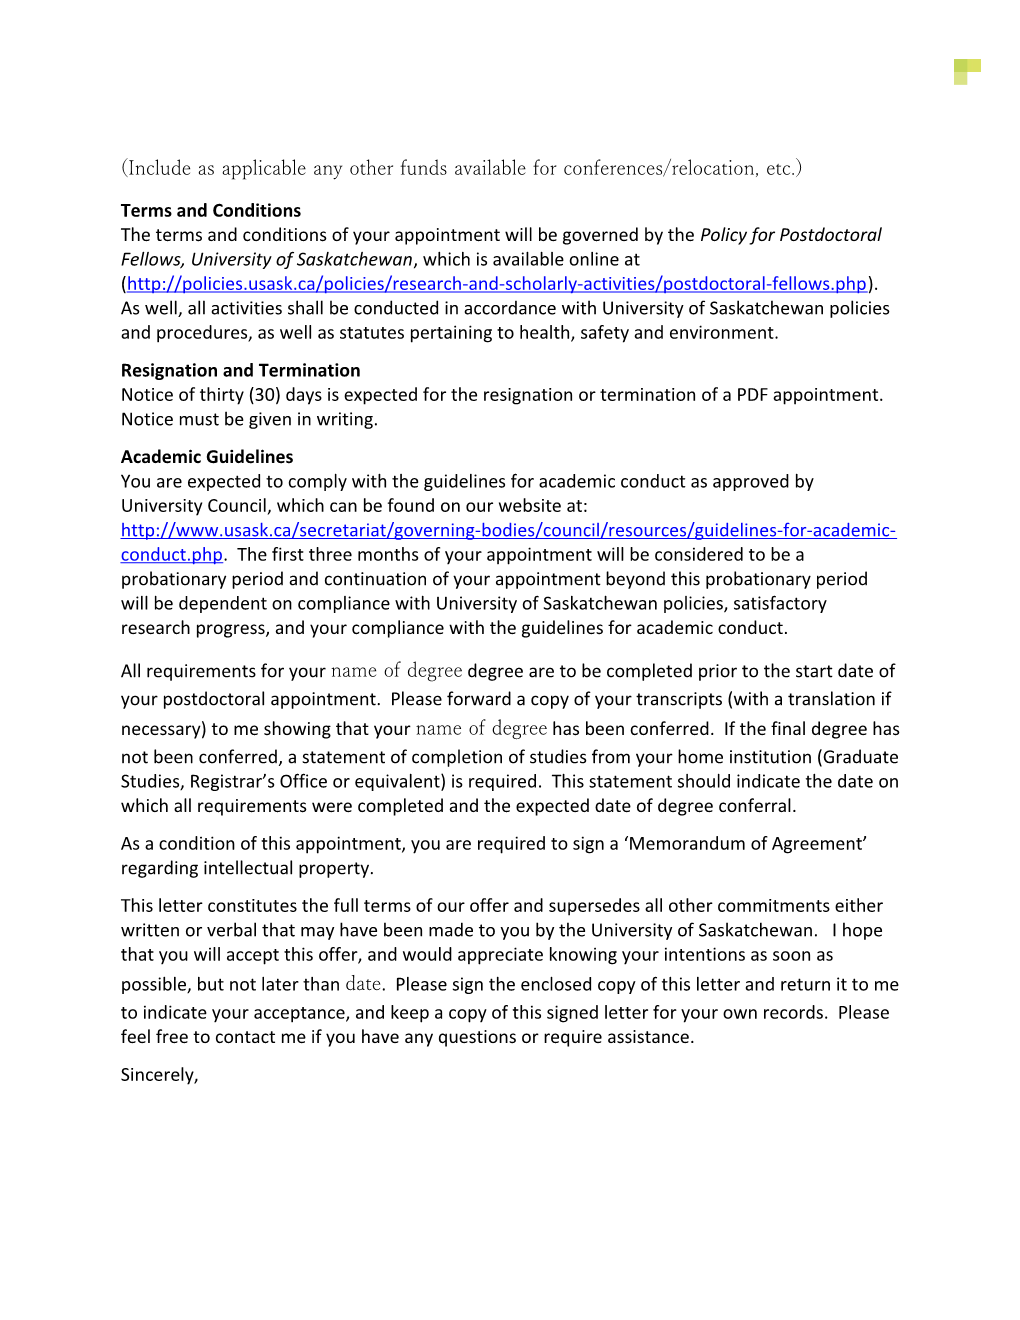 I Am Pleased to Offer You an Appointment As a Postdoctoral Fellow (PDF) with the Department